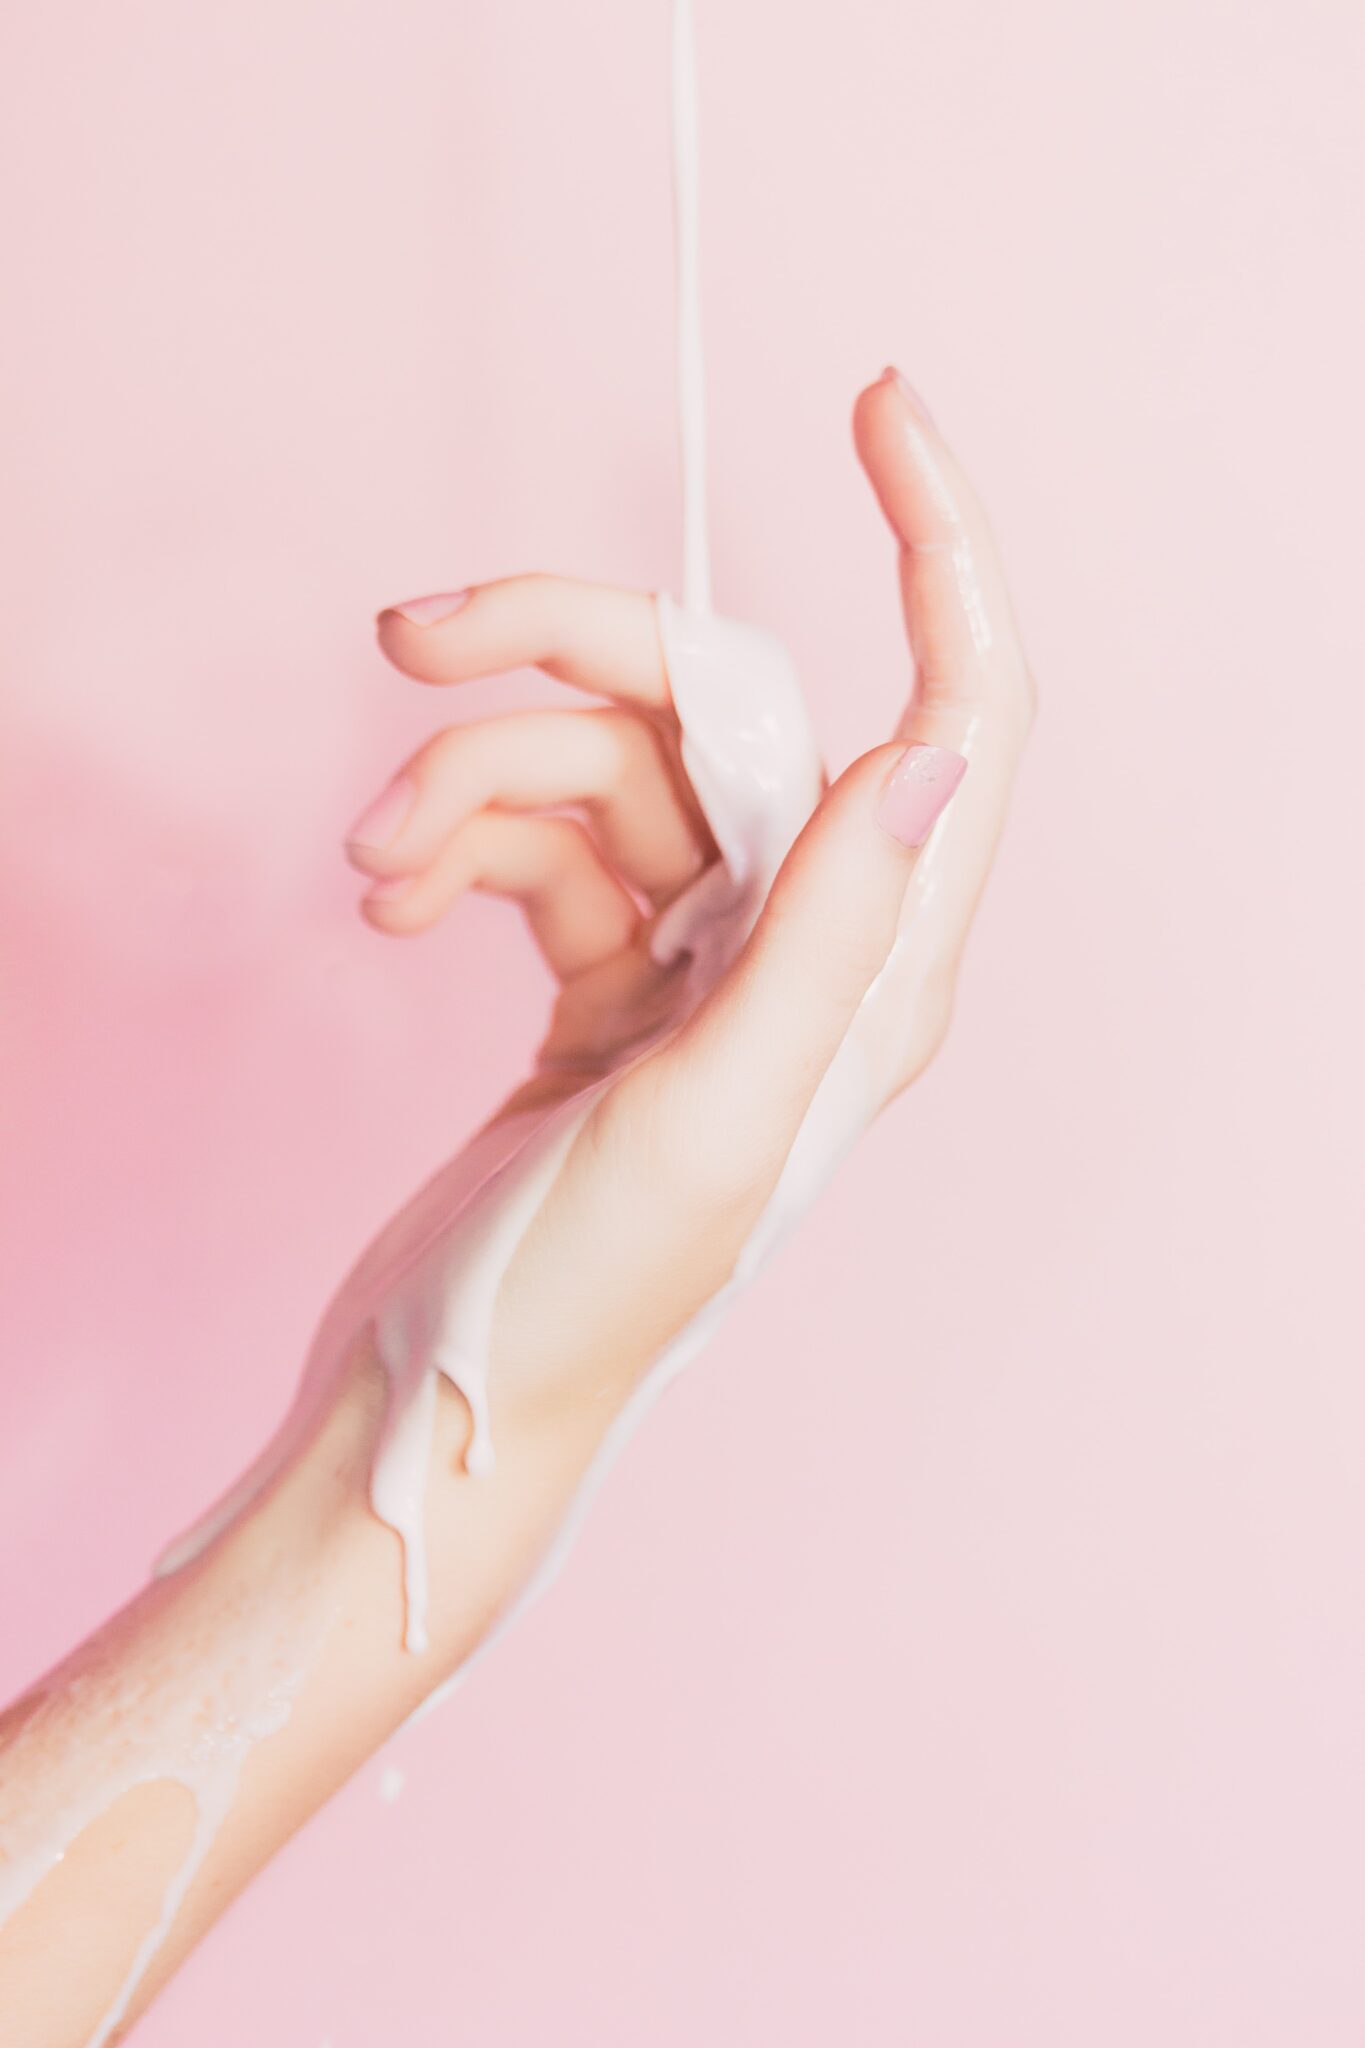 A woman's hand dripping in white liquid.